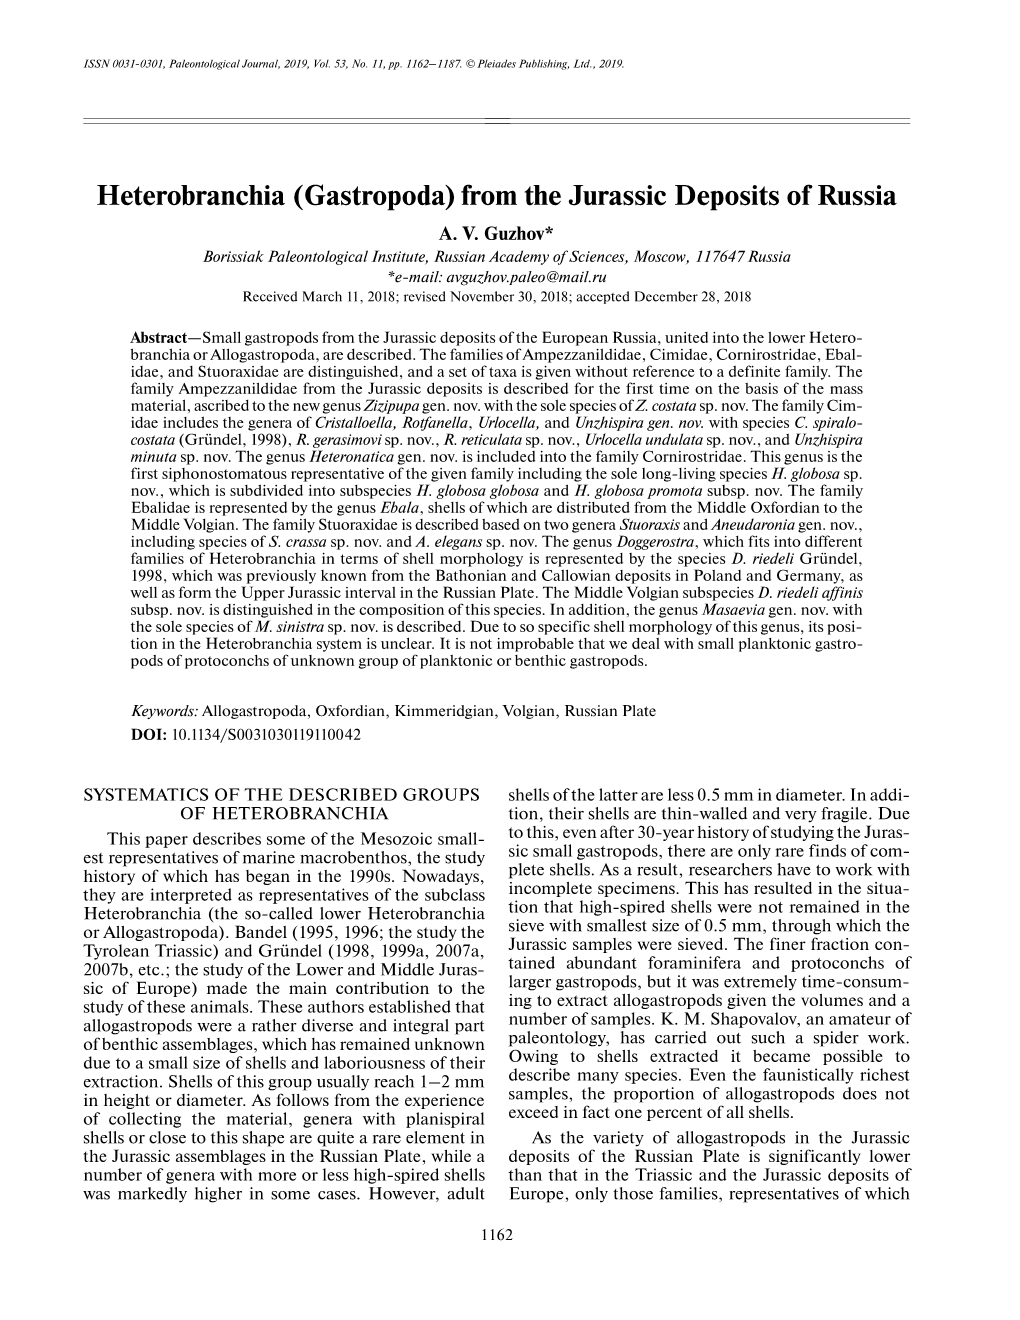 Heterobranchia (Gastropoda) from the Jurassic Deposits of Russia A